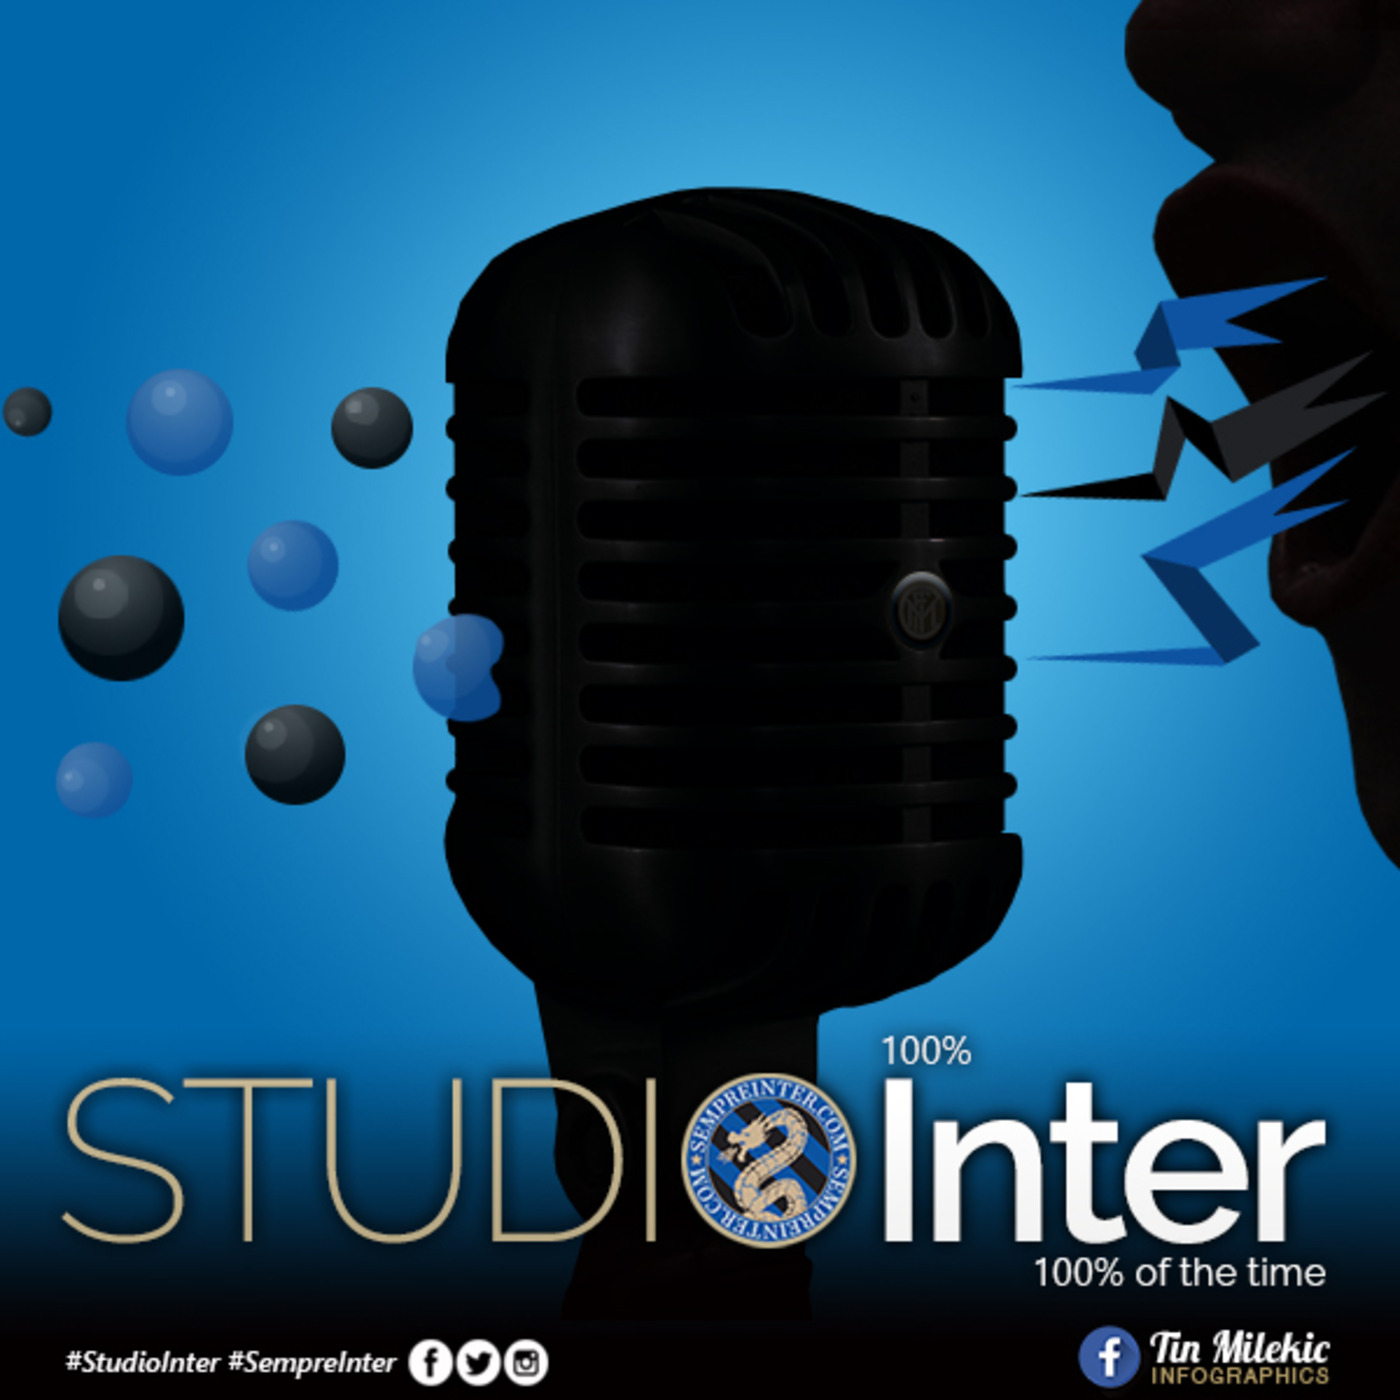 Episode 182: #StudioInter Ep. 182: ”Inter’s Job Is To Win For Nerazzurri Fans Not To Entertain The World”